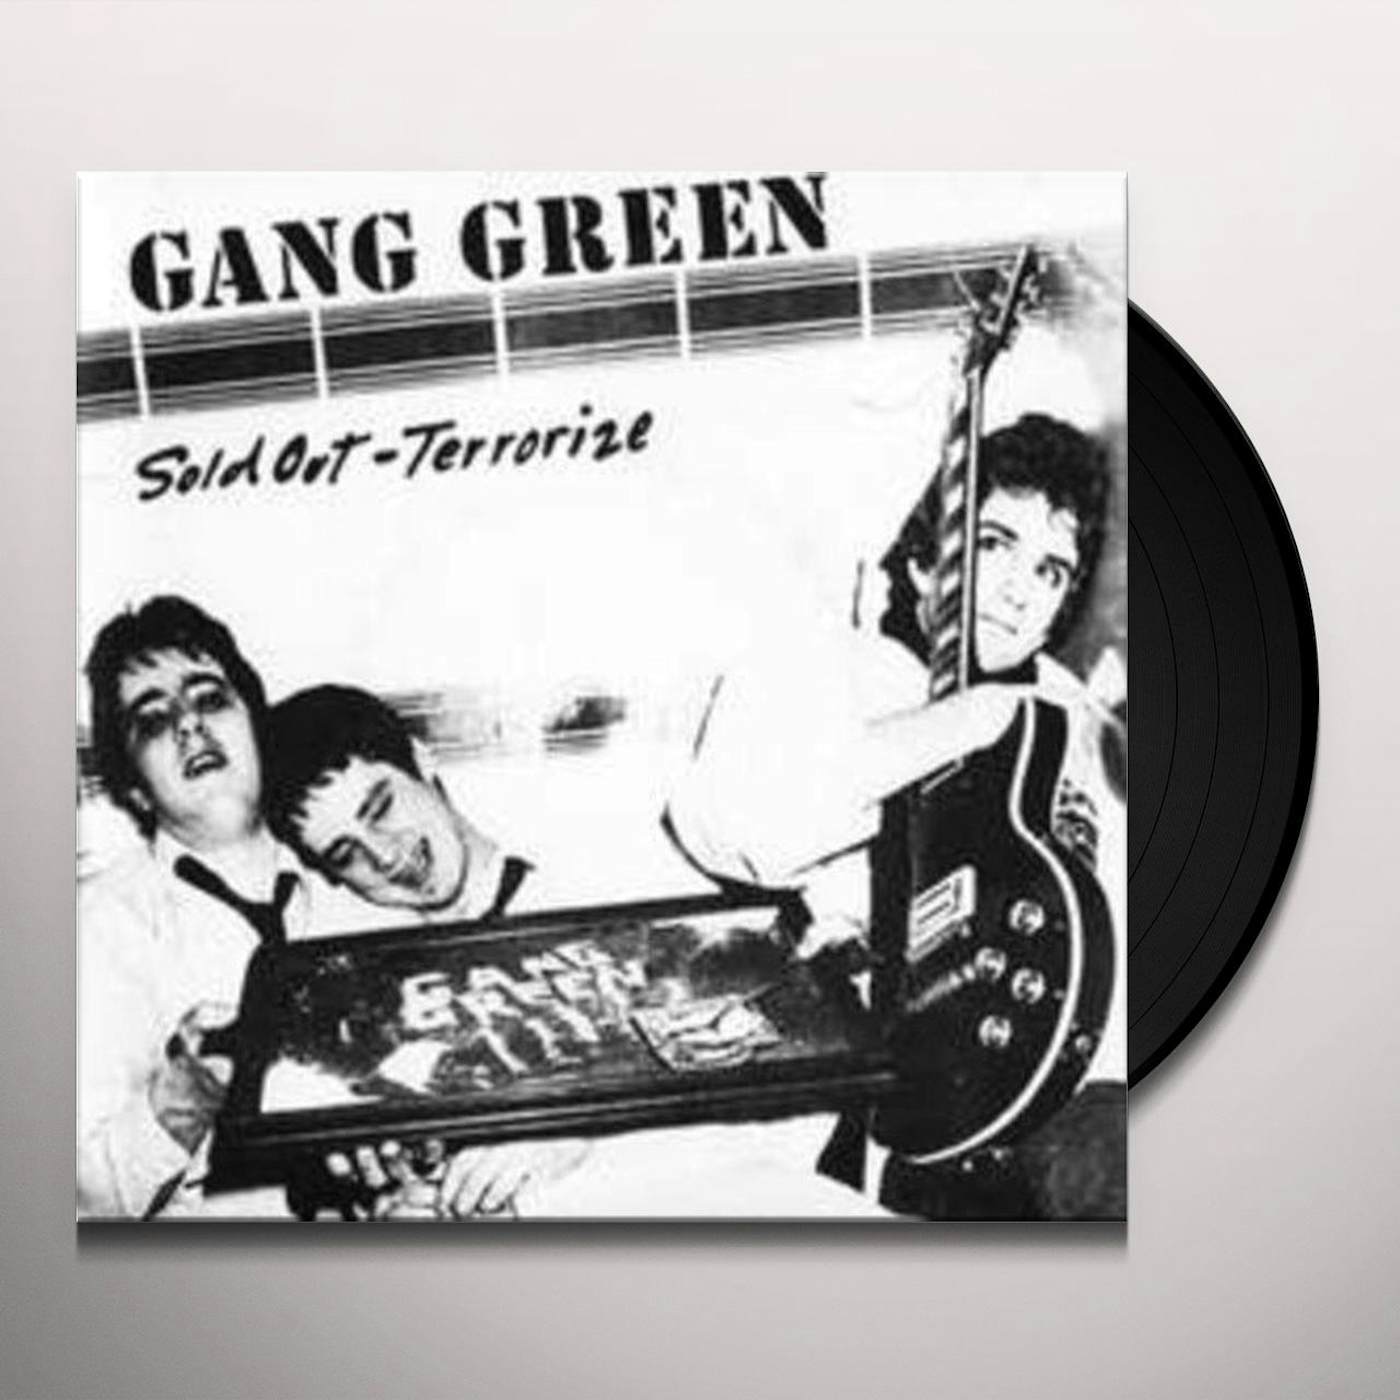 Gang Green SOLD OUT / TERRORIZE Vinyl Record